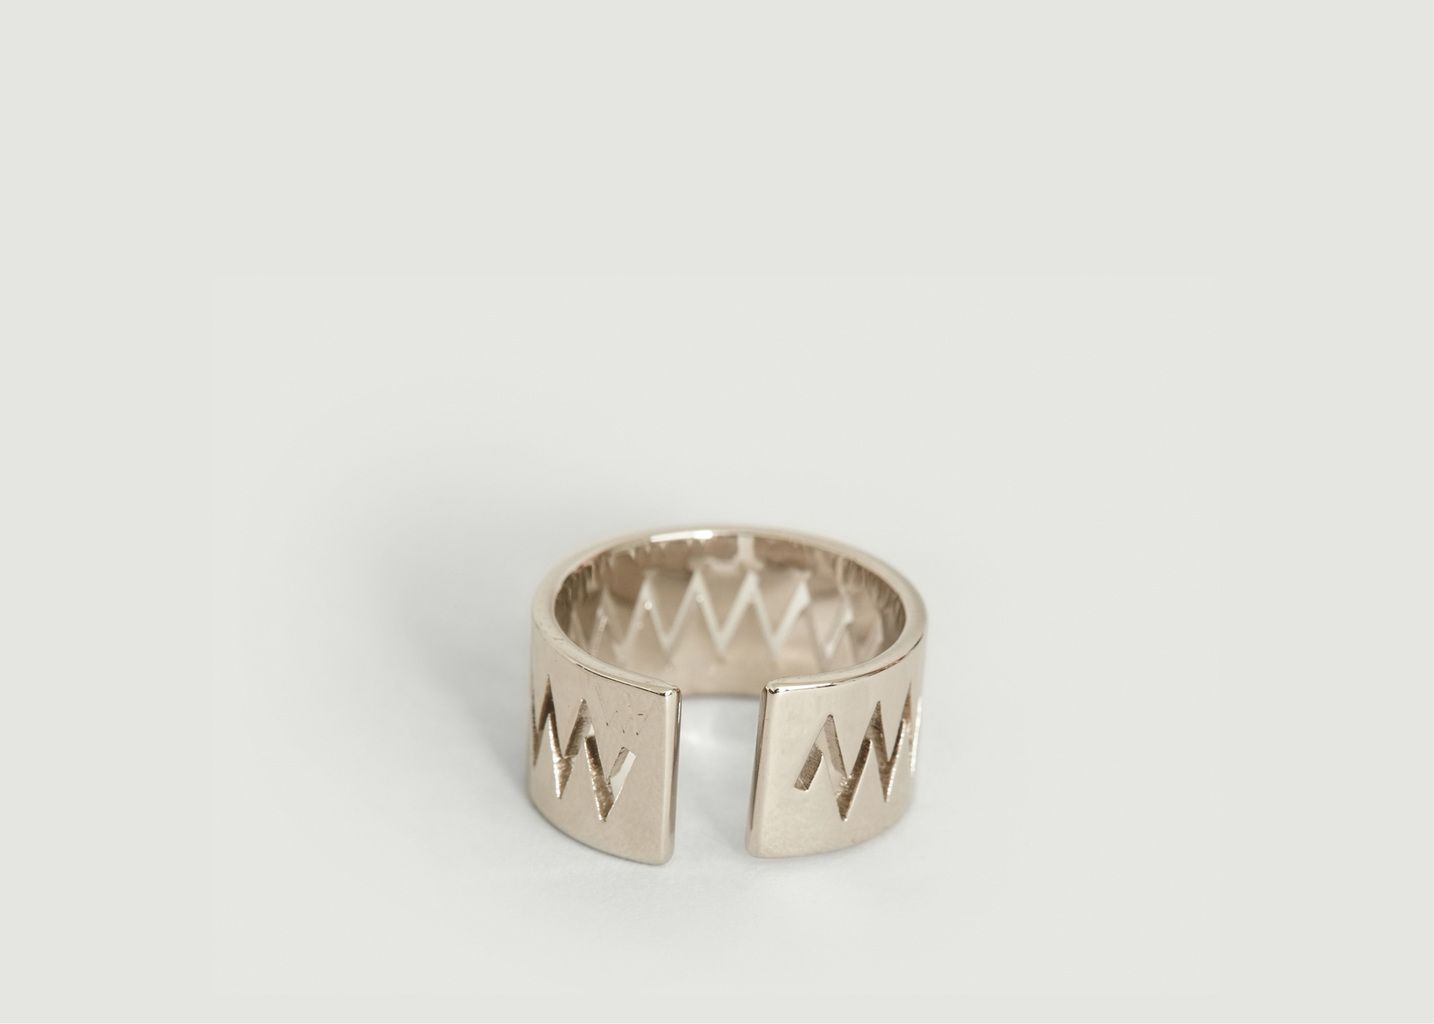 Carnivore Ring - Annelise Michelson